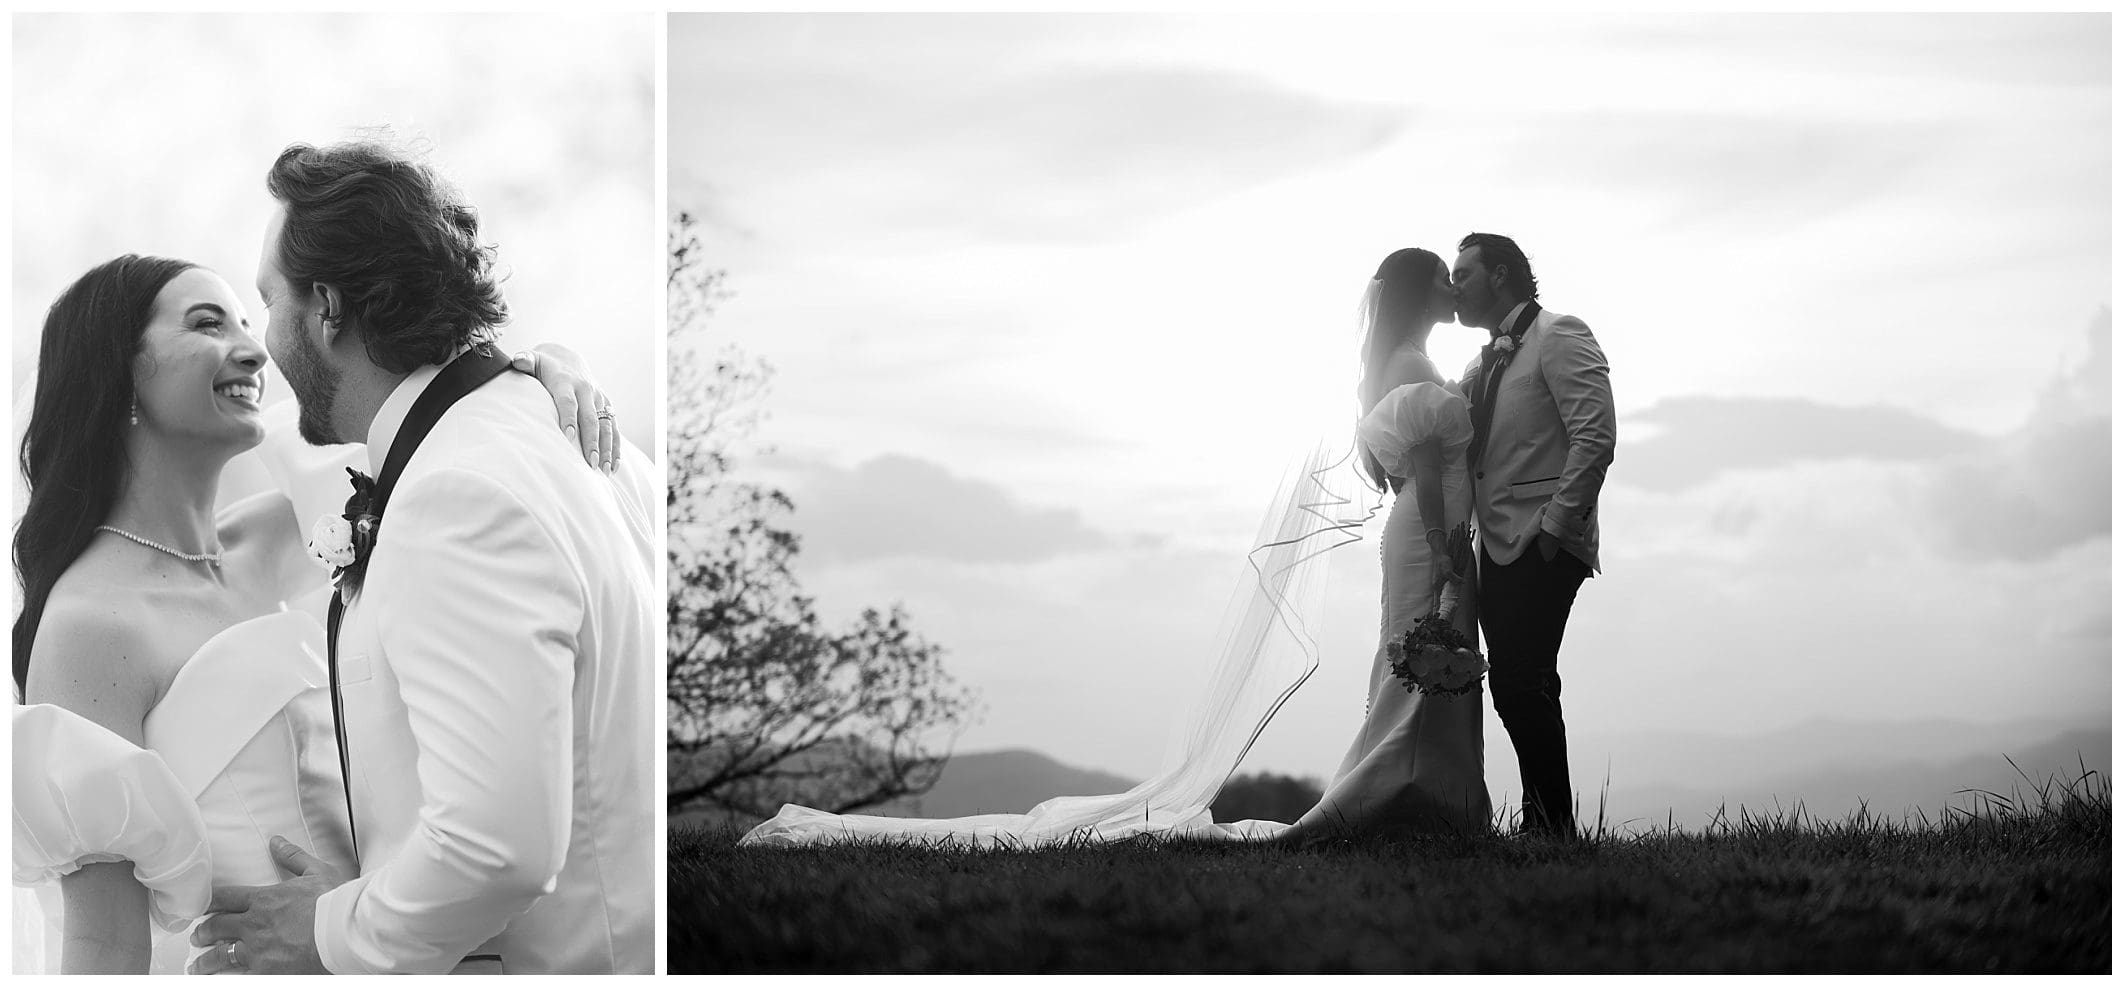 A bride and groom share a close, joyful moment in a black and white photo on the left, and embrace as they kiss against a cloudy, mountainous backdrop on the right.